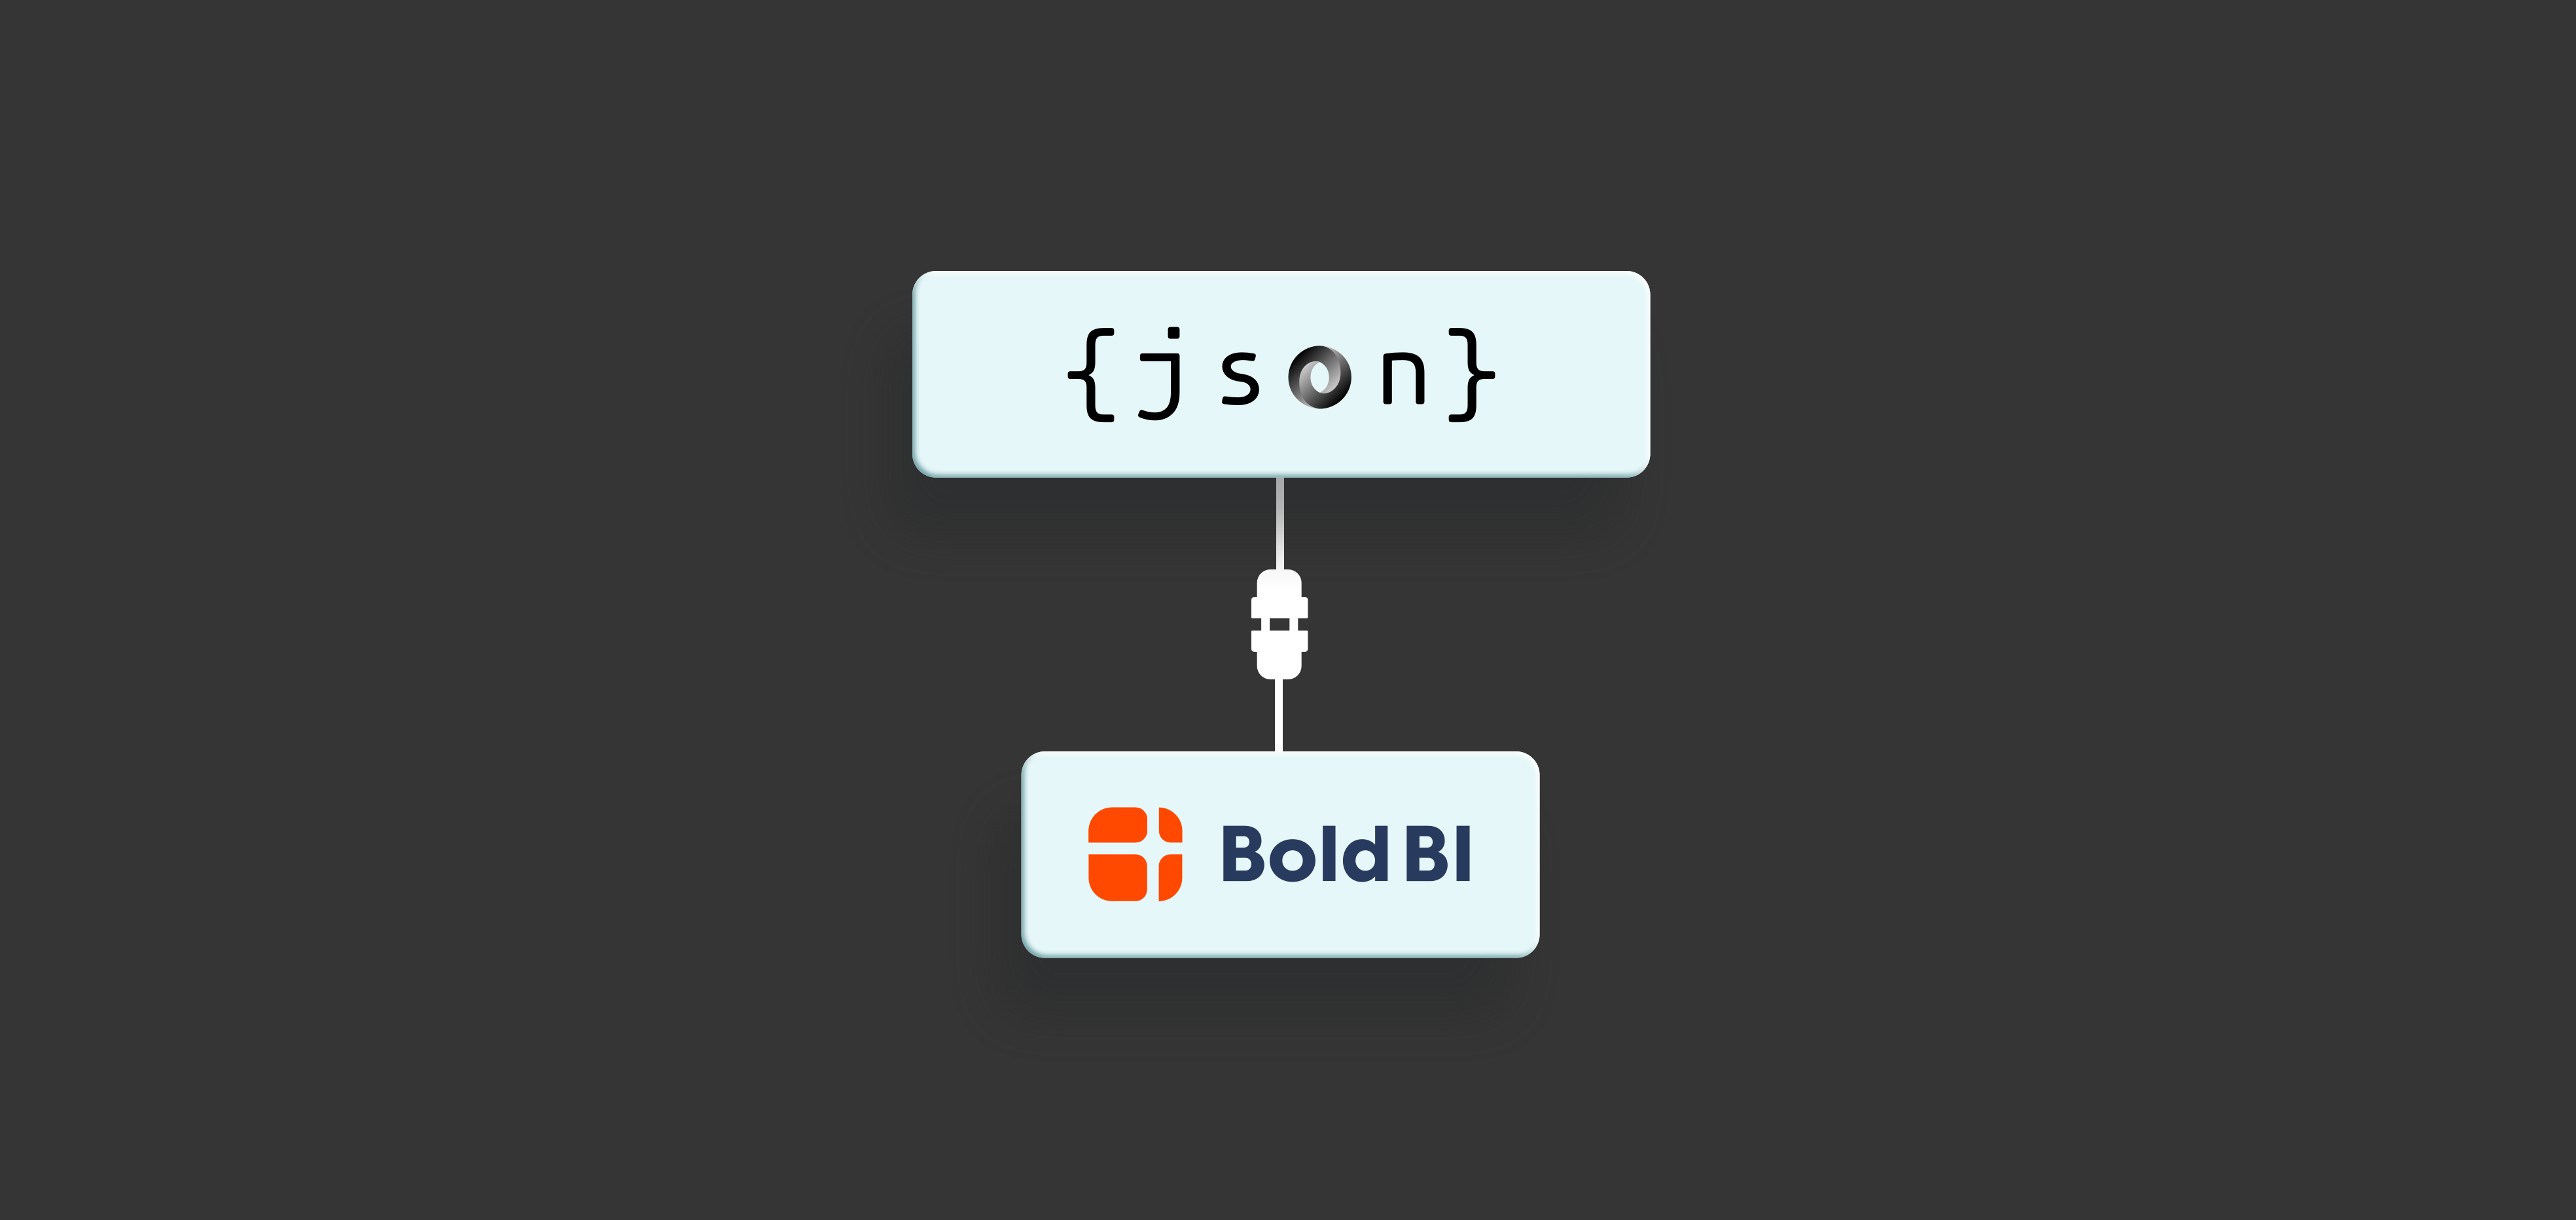 Connecting Bold BI to JSON data source